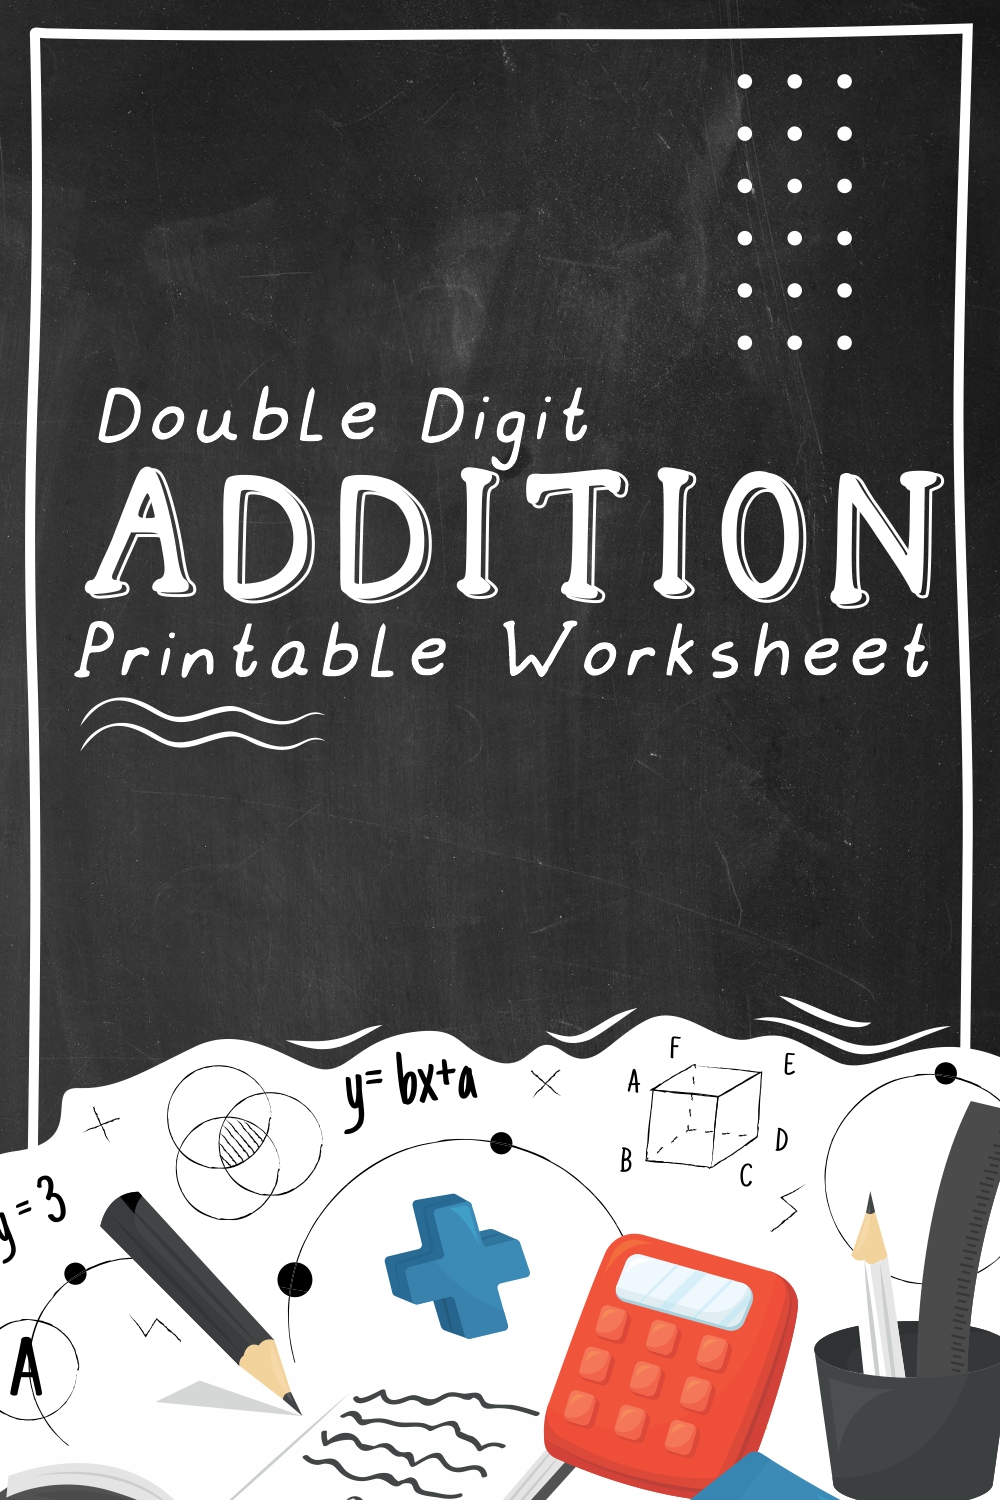 Double- Digit Addition Printable Worksheets